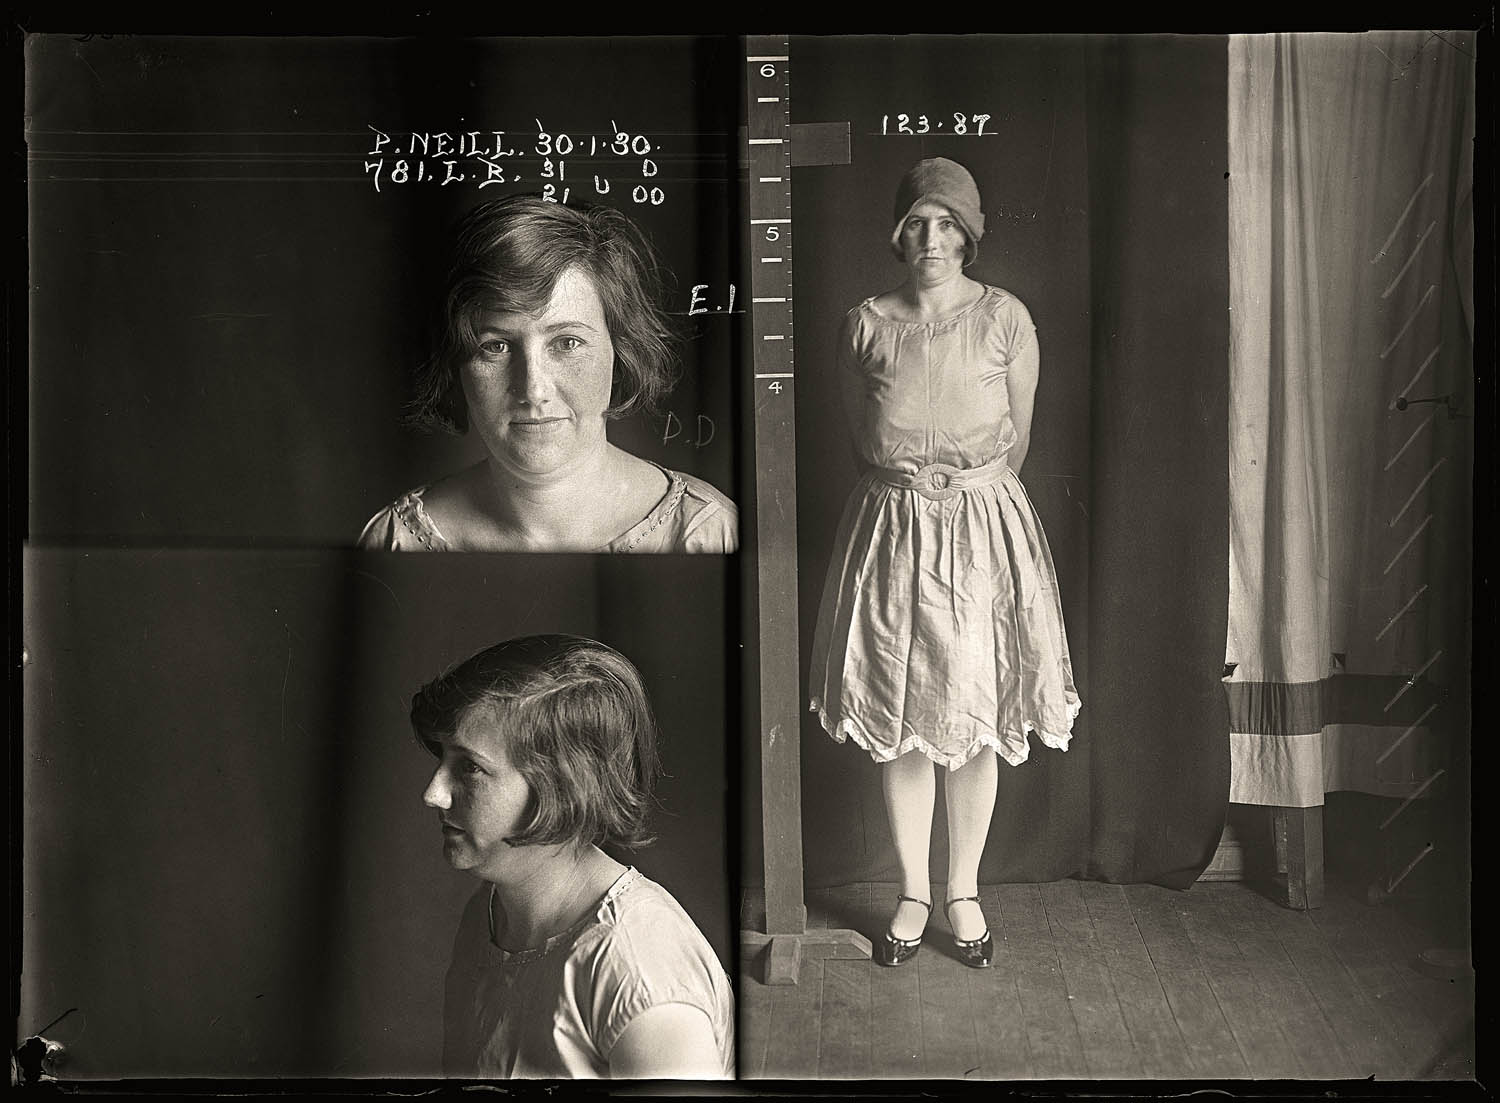 Patsy Neill, criminal record number 781LB, 30 January 1930. State Reformatory for Women, Long Bay, NSW 